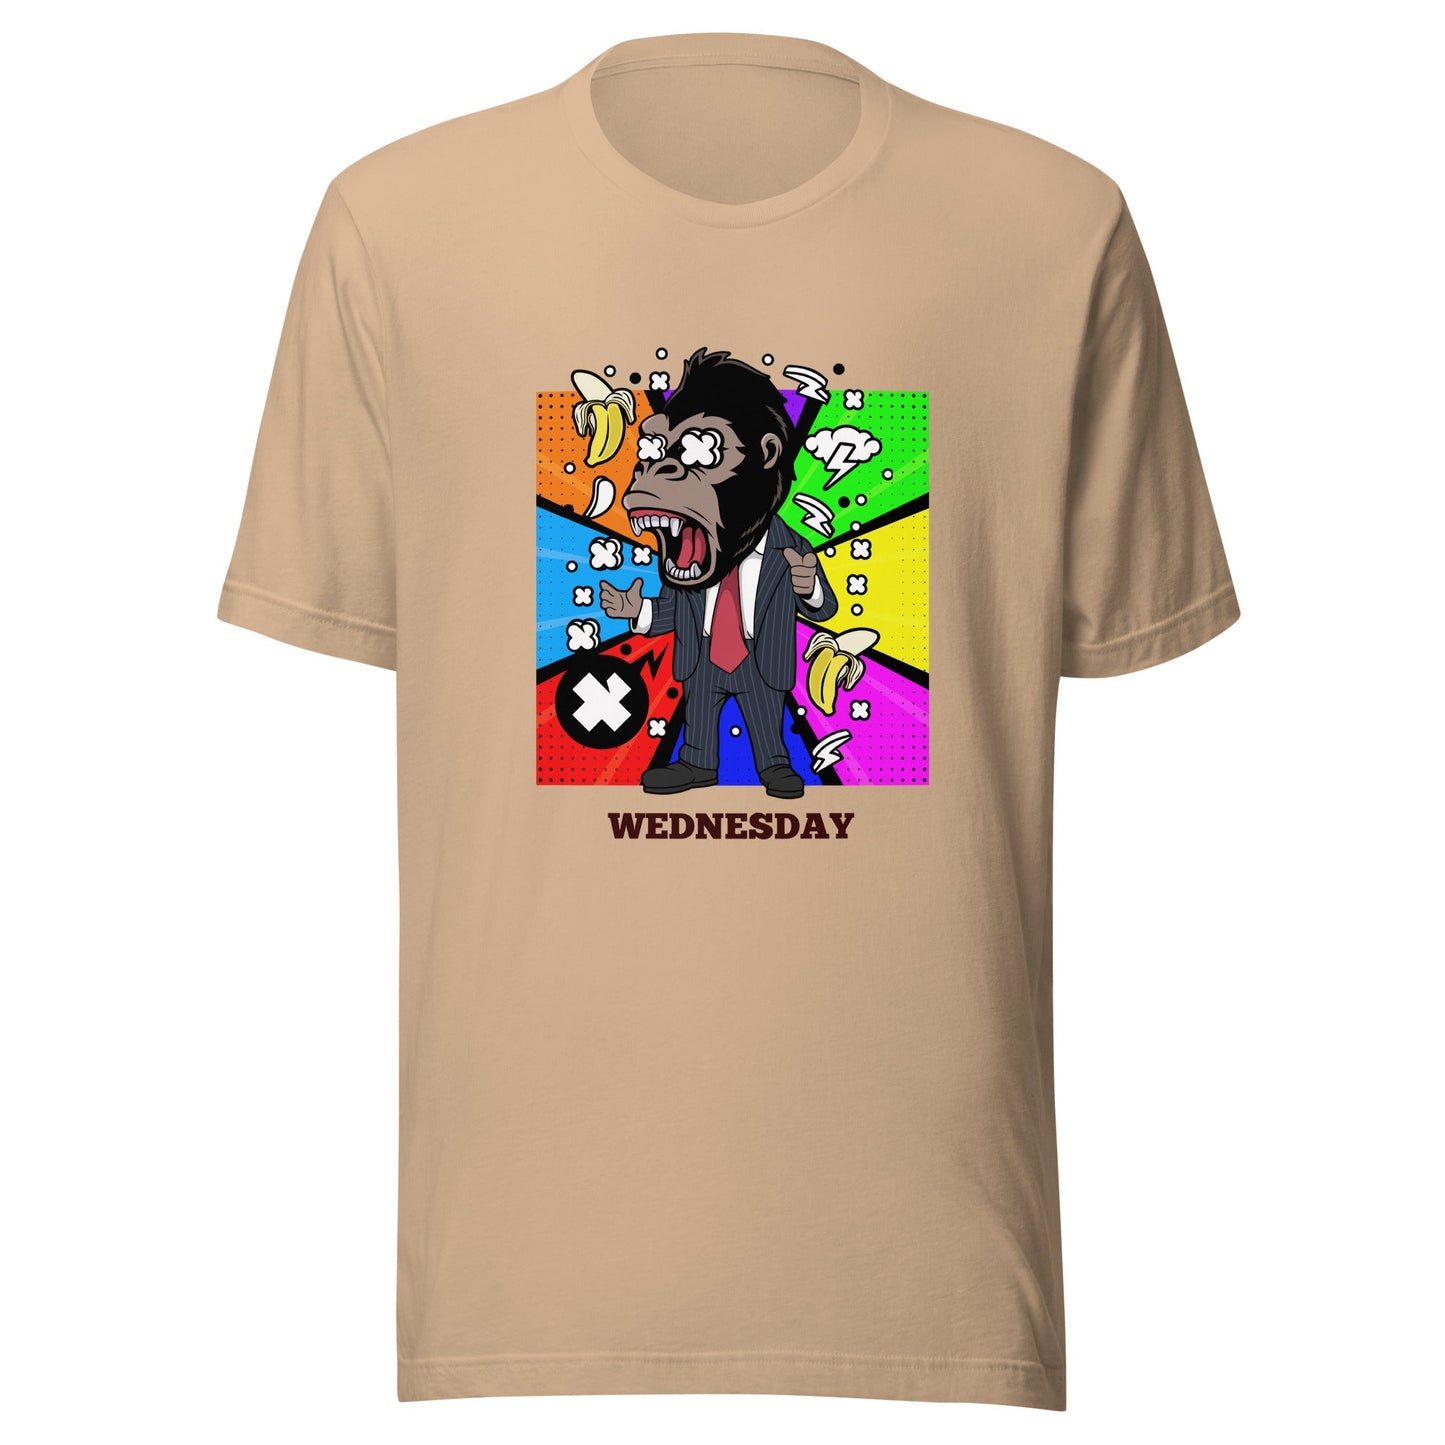 Express Your Mood with the Wednesday Gorilla Angry Unisex T-Shirt - Wear Your Emotions